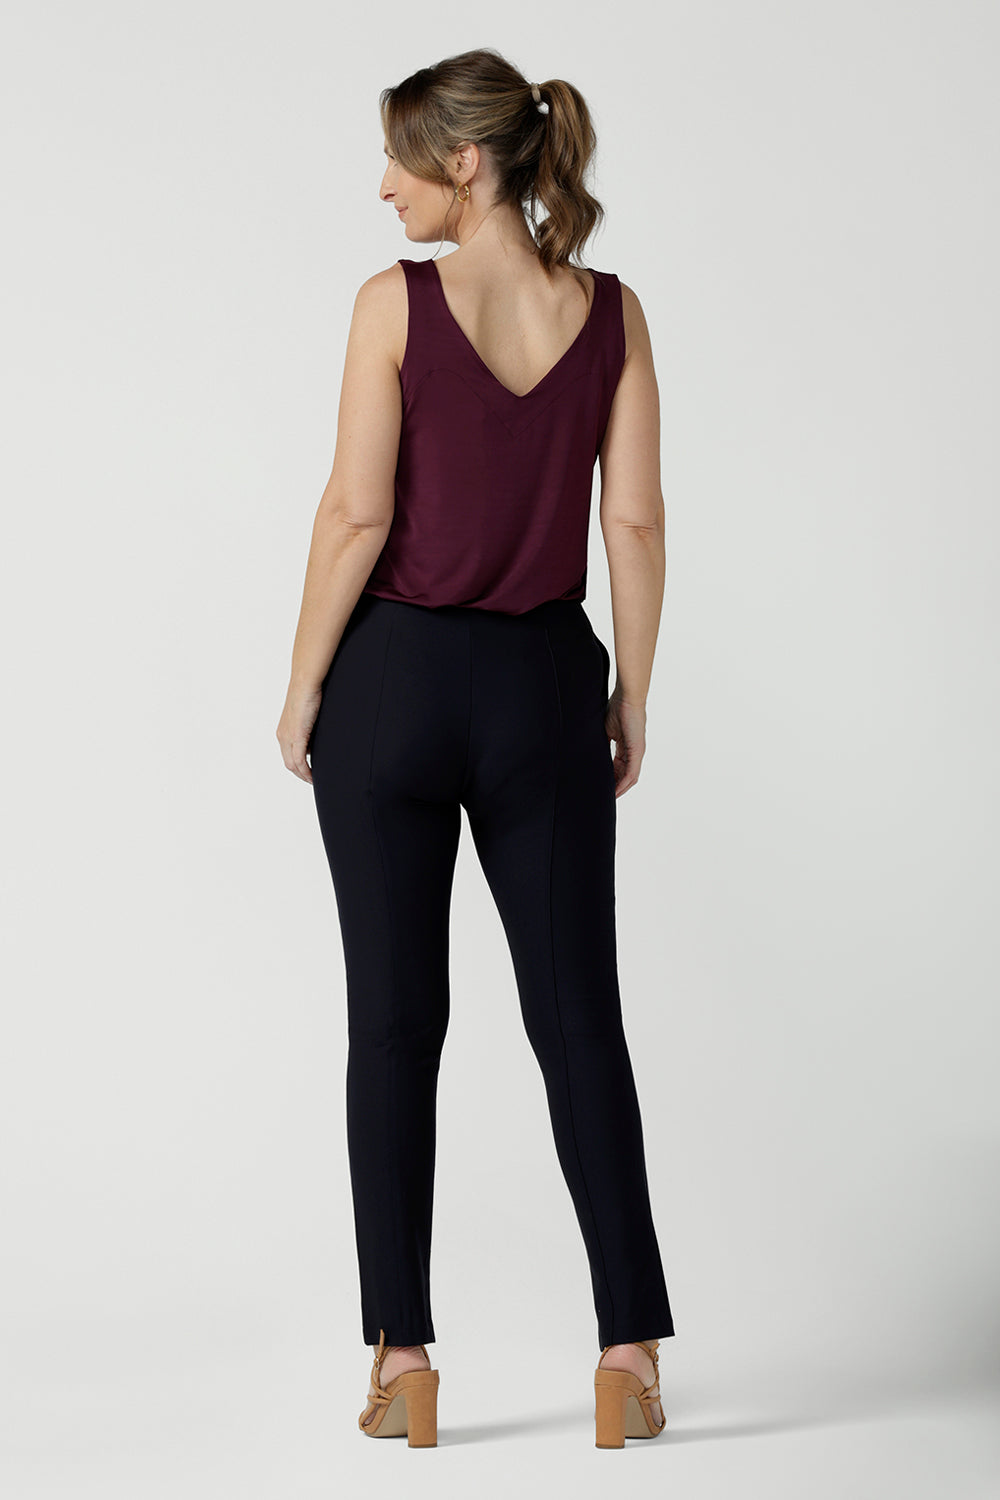 Back view of a size 10, 40 plus woman wearing mid-rise, slim leg navy pants by Australian and New Zealand women's clothing label, L&F. These skinny workwear trousers have a concealed zip fastening and side pockets. Worn with a plus red cami top with wide shoulder straps. Shop these navy workwear pants in an inclusive size range of 8 to 24.